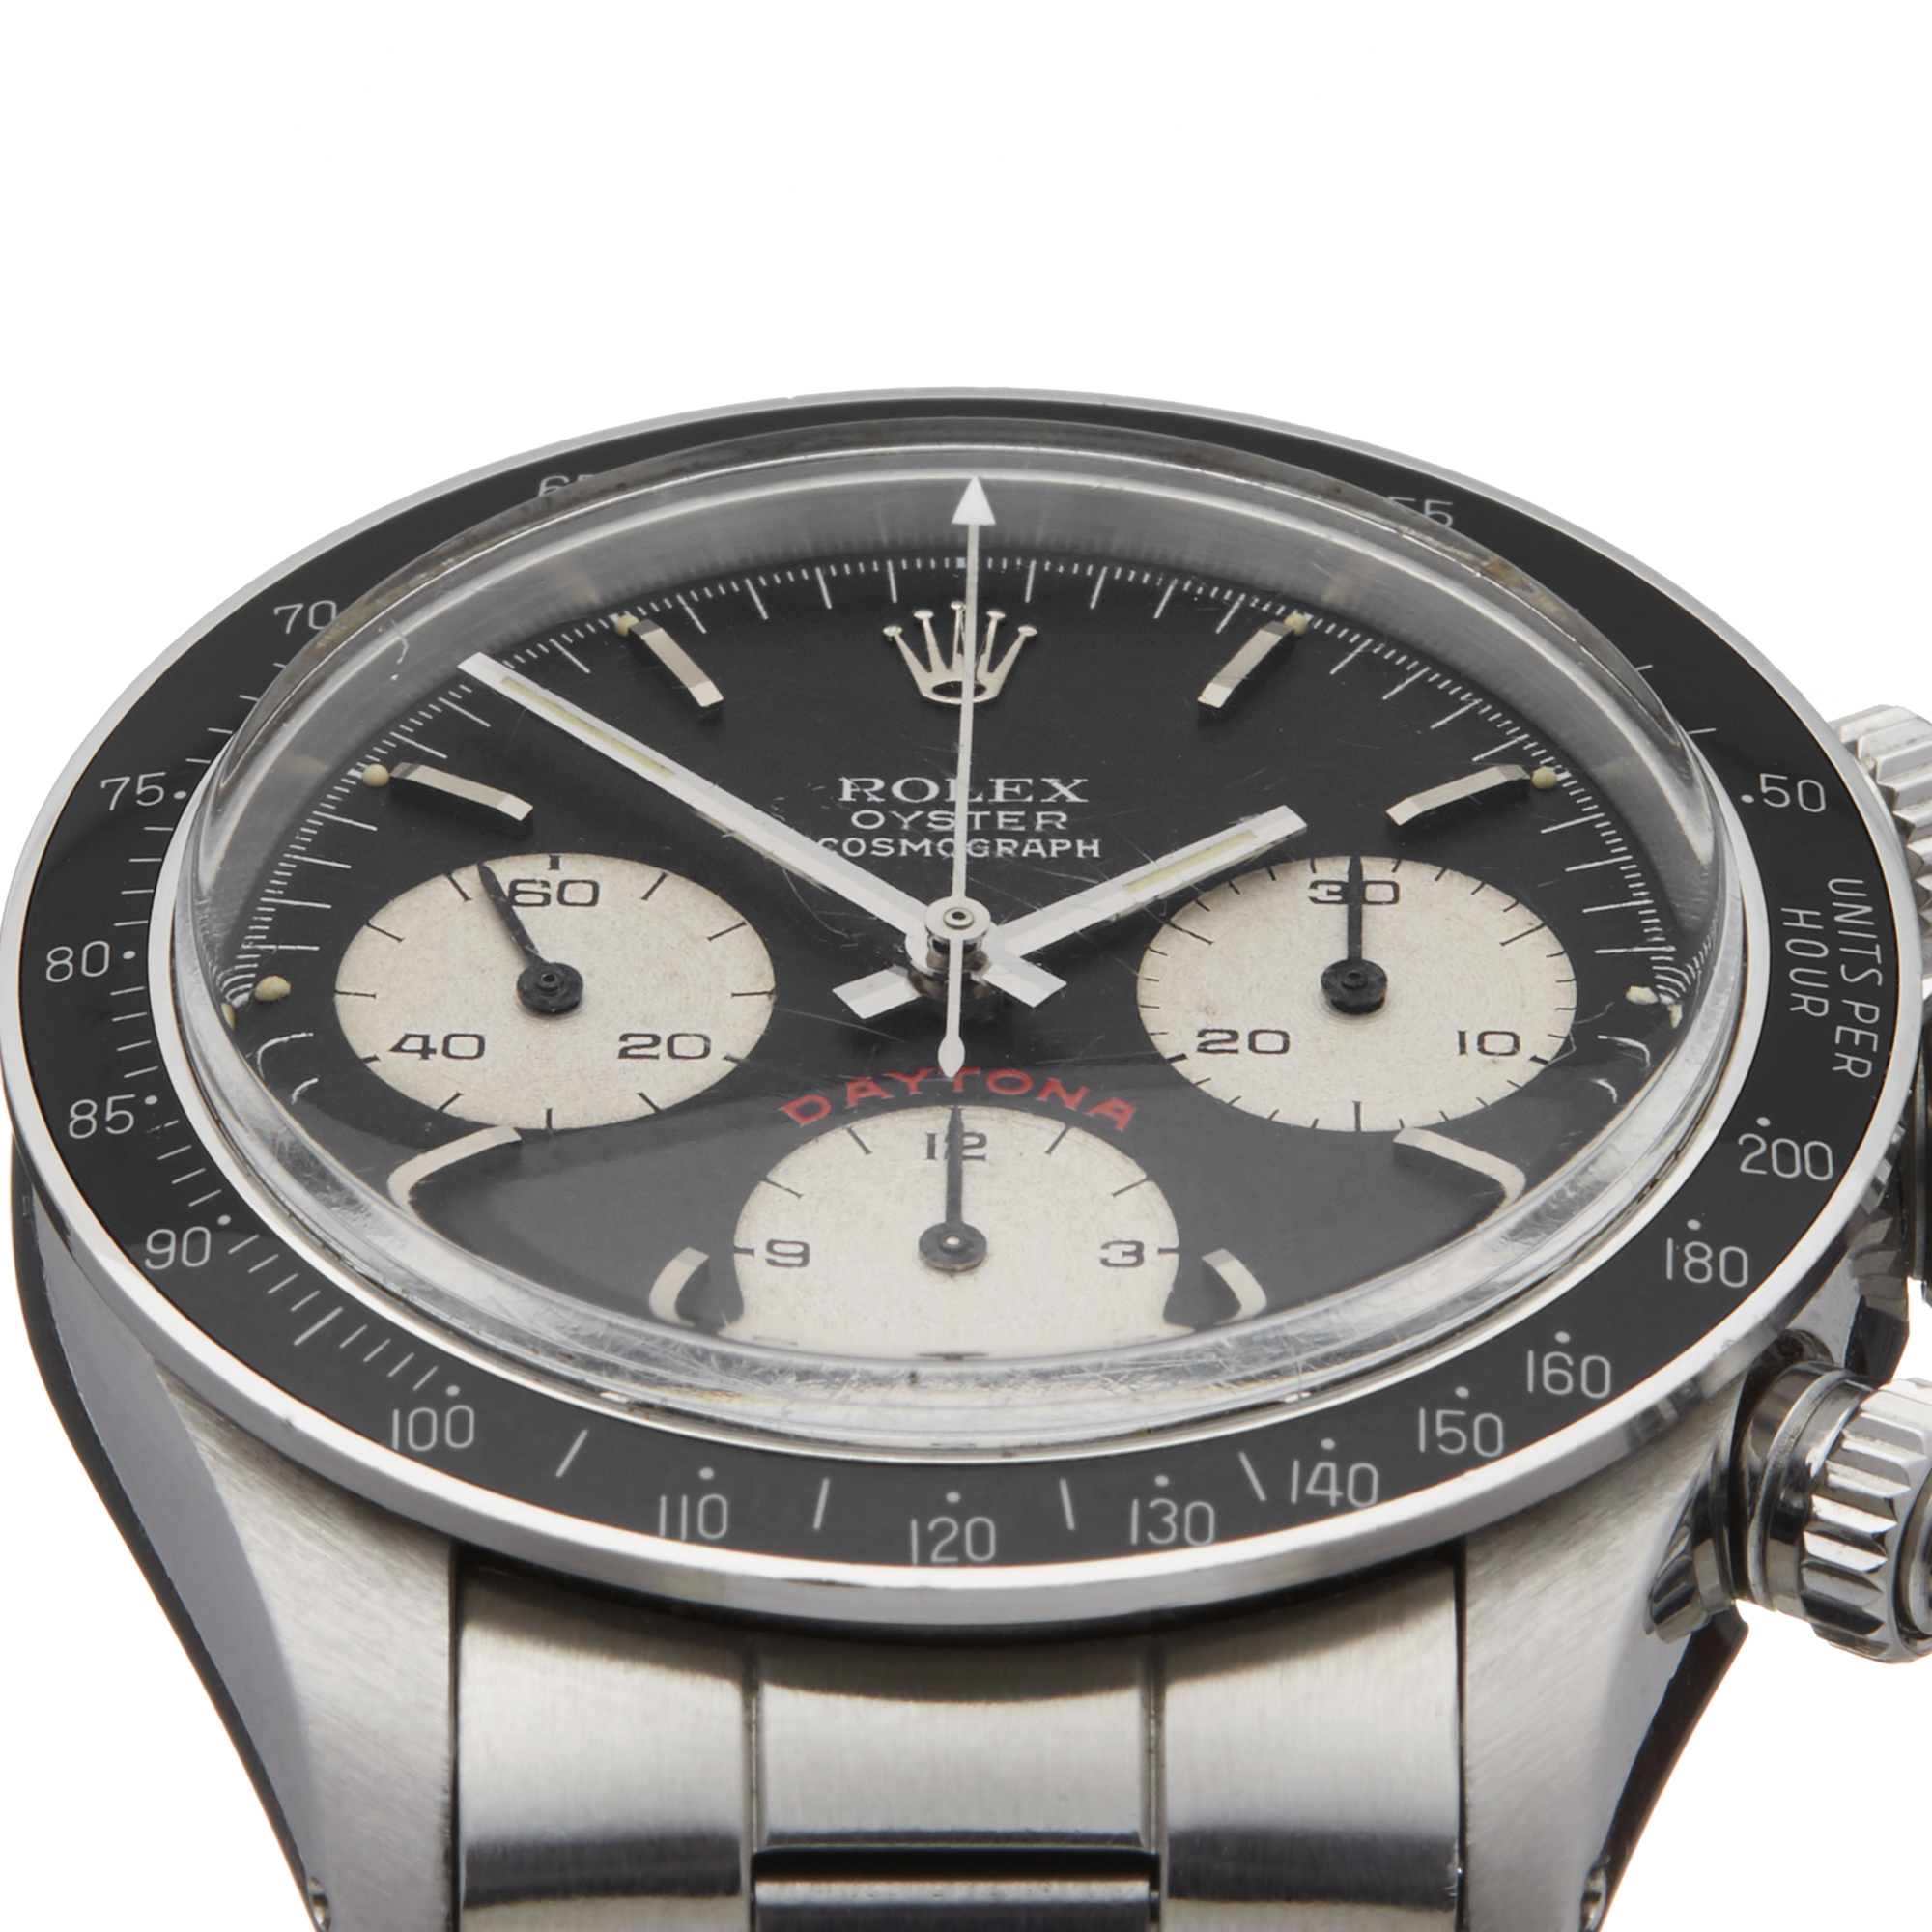 Rolex Daytona 0 6263 Men Stainless Steel Big Red Cosmograph Watch - Image 8 of 9